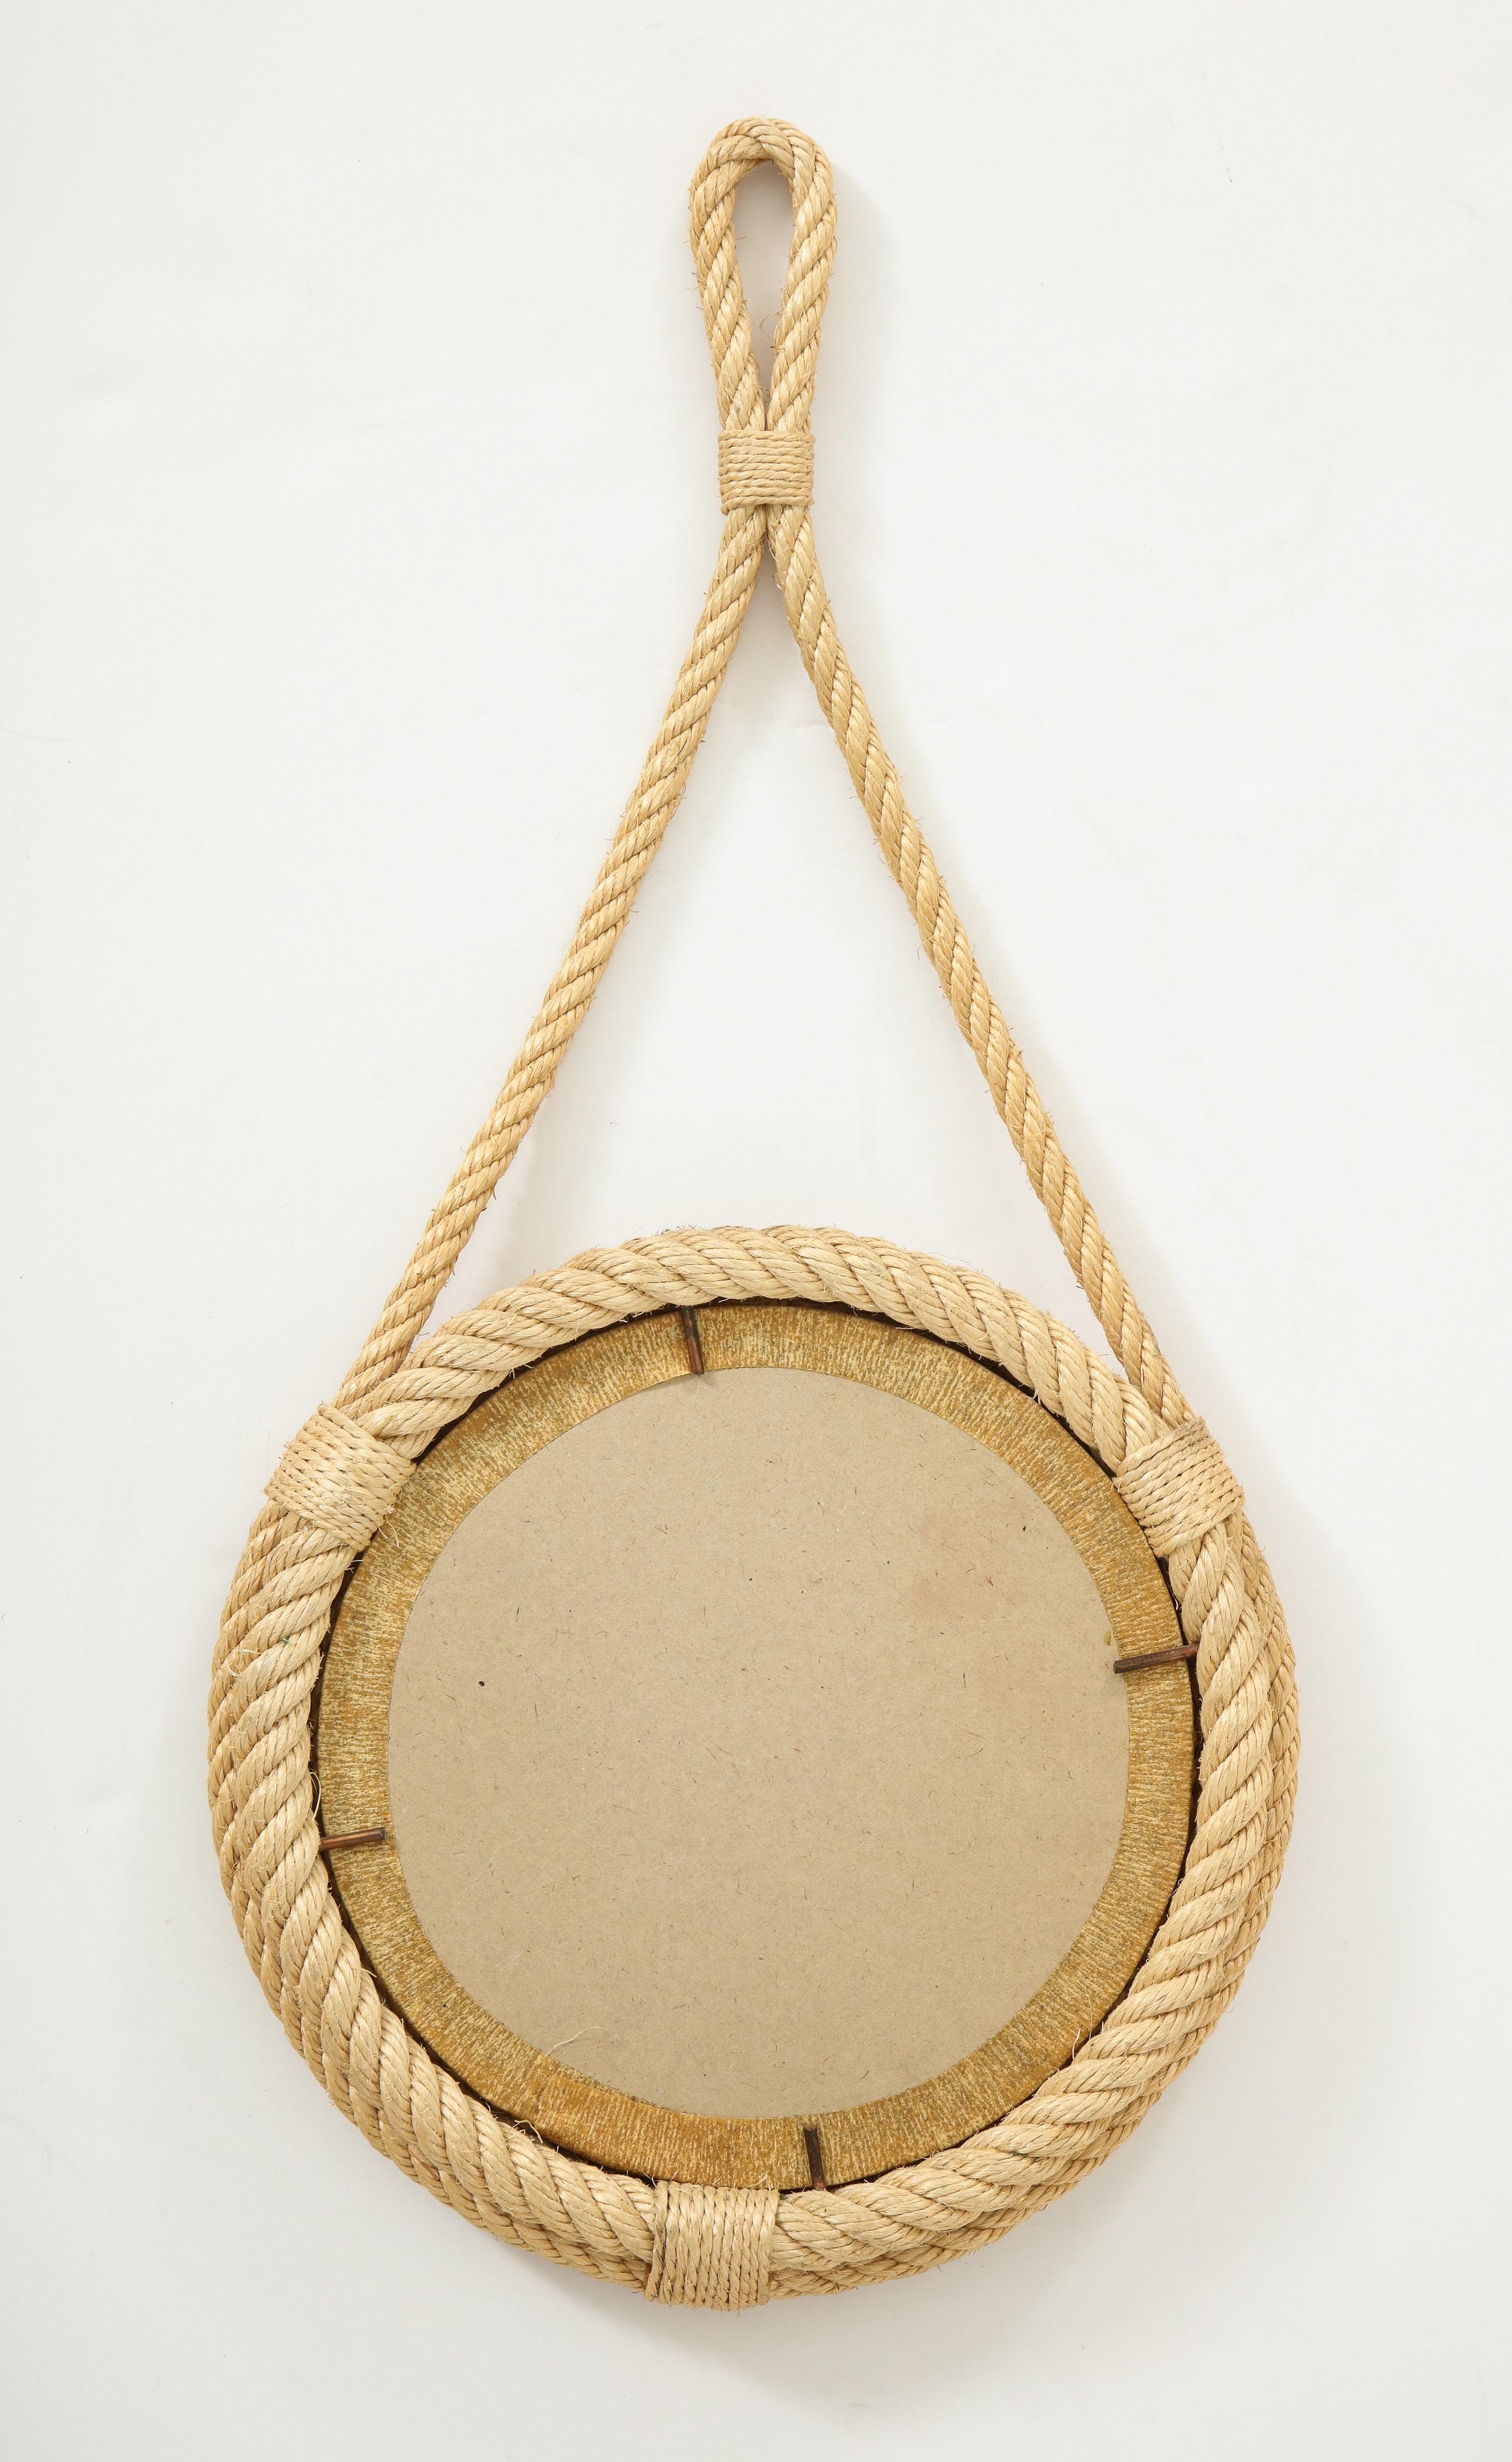 Petite Rope Wall Mirror by Audoux Minnet, France, 1960s For Sale 2